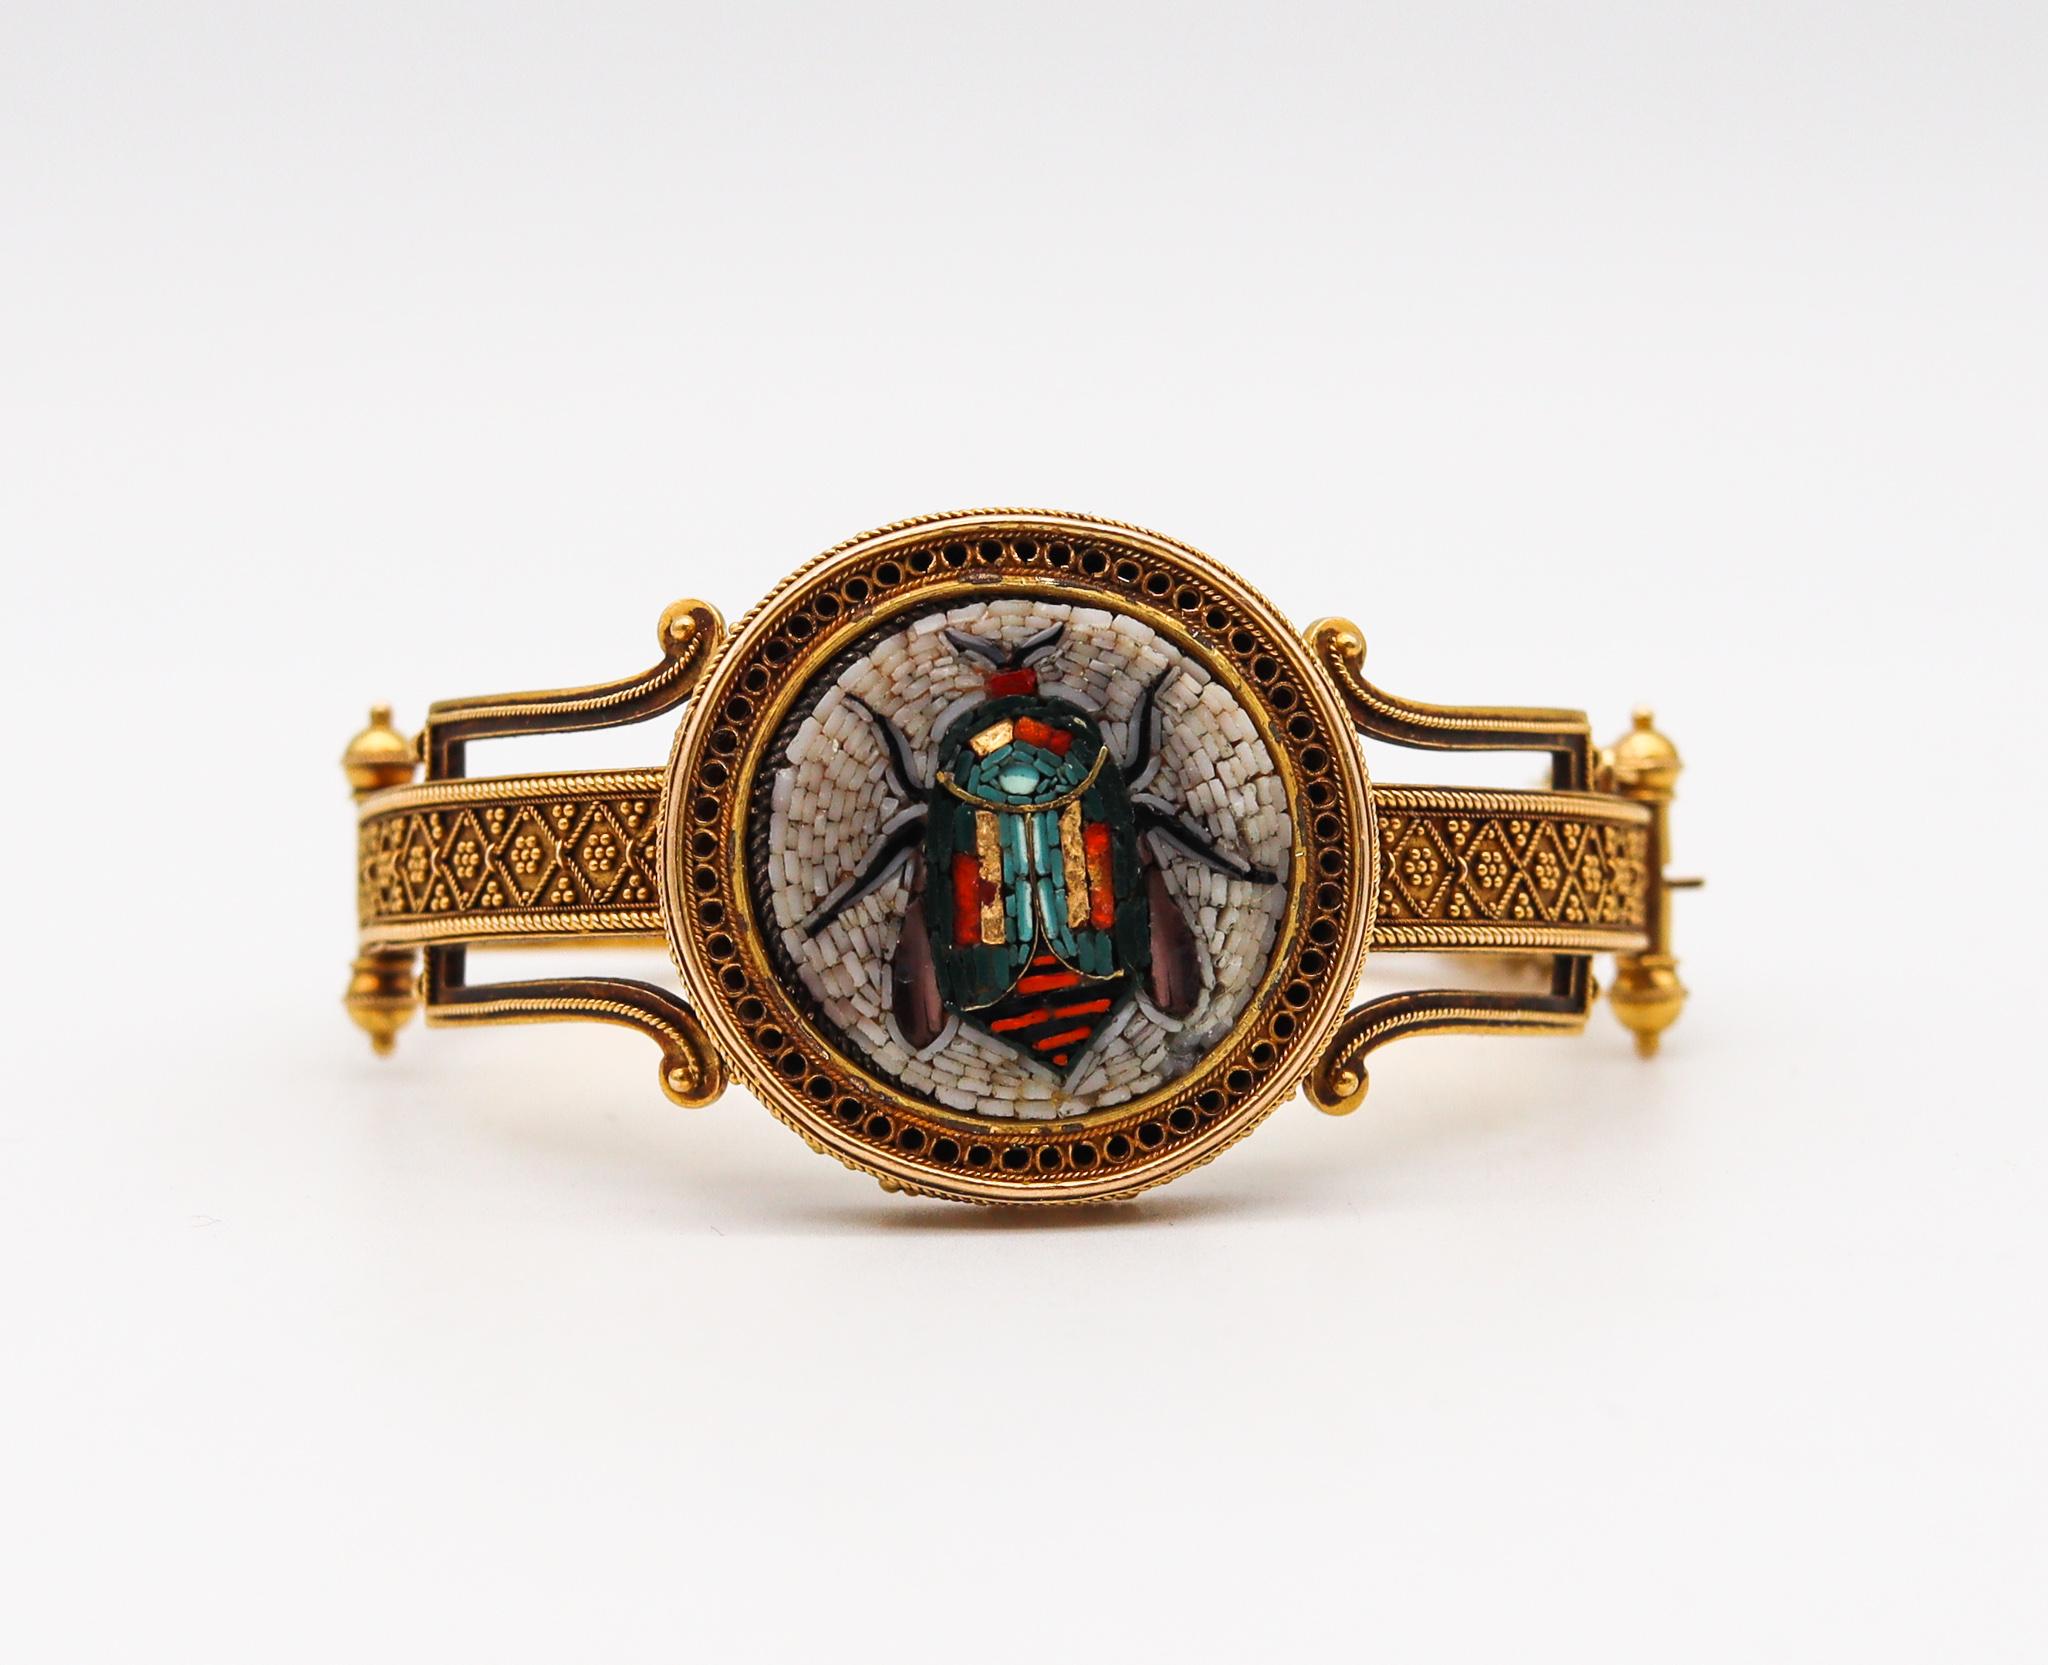 Cabochon Etruscan Revival 1880 Scarab Micro Mosaic Bracelet in Textured 18kt Yellow Gold